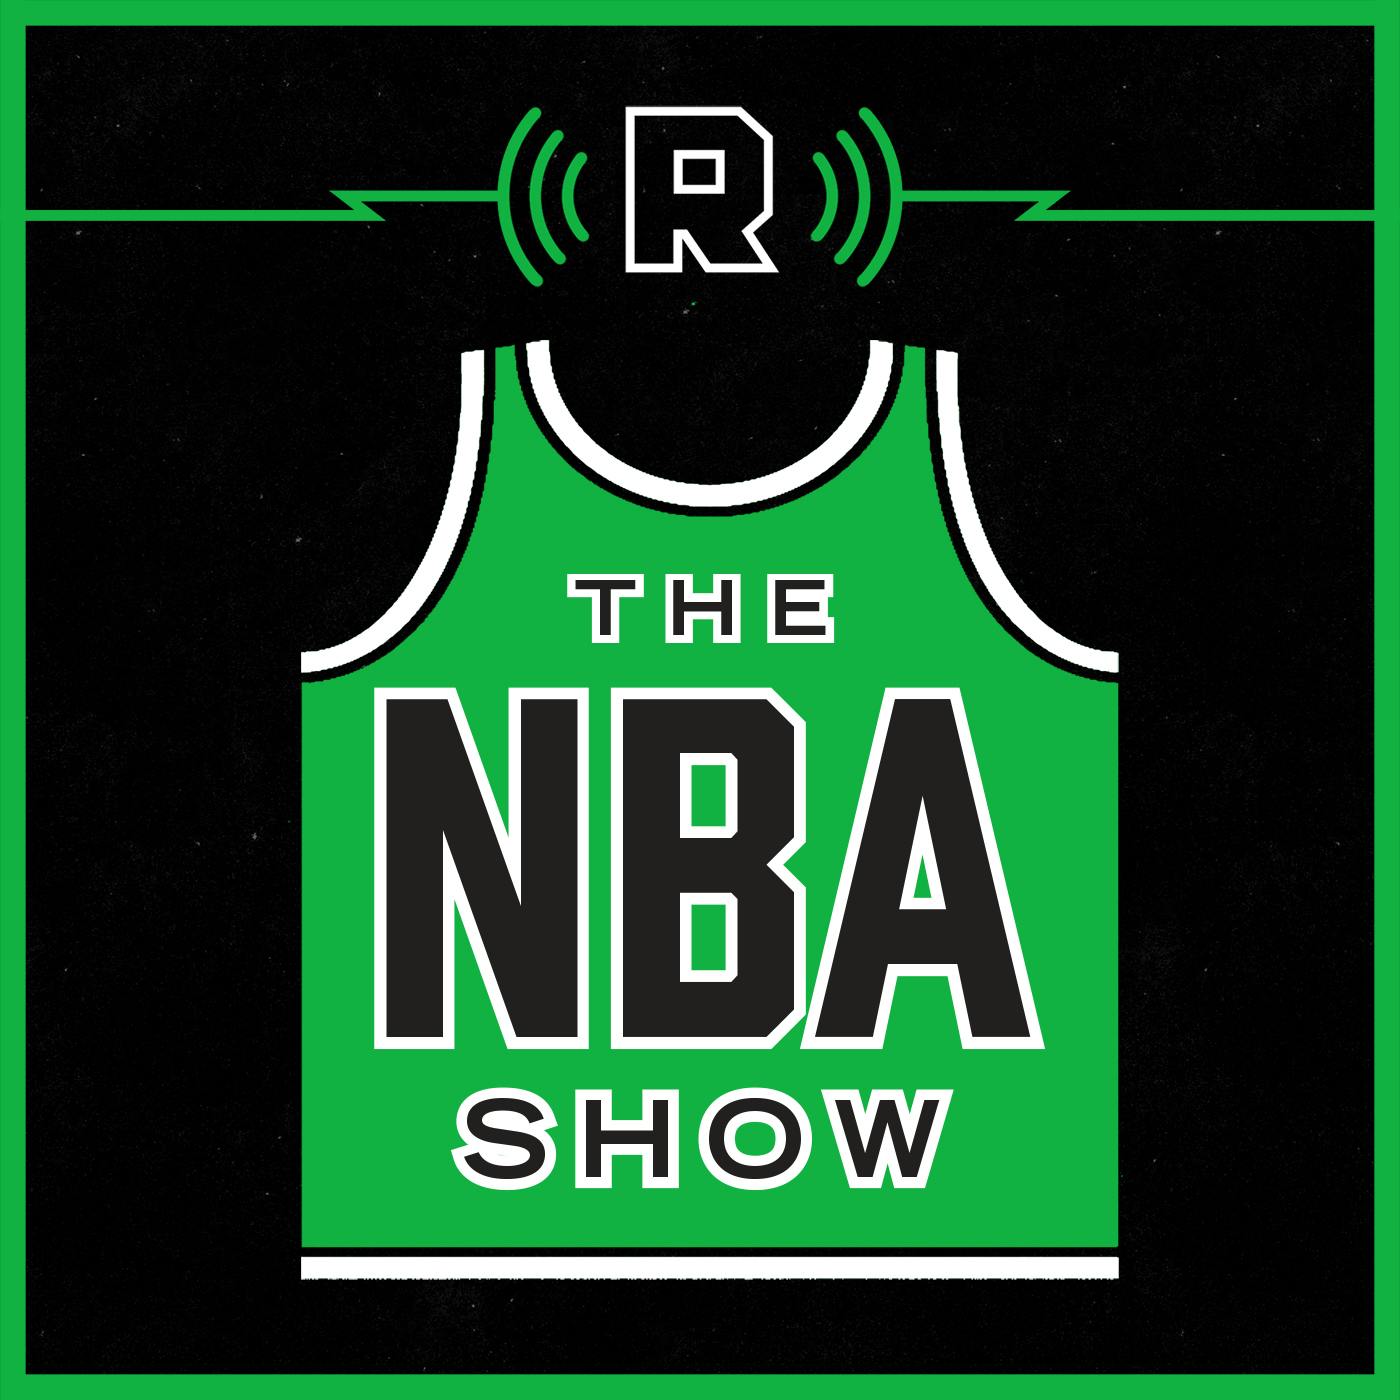 Summer League Standouts and More NBA Free Agency (Ep. 133)